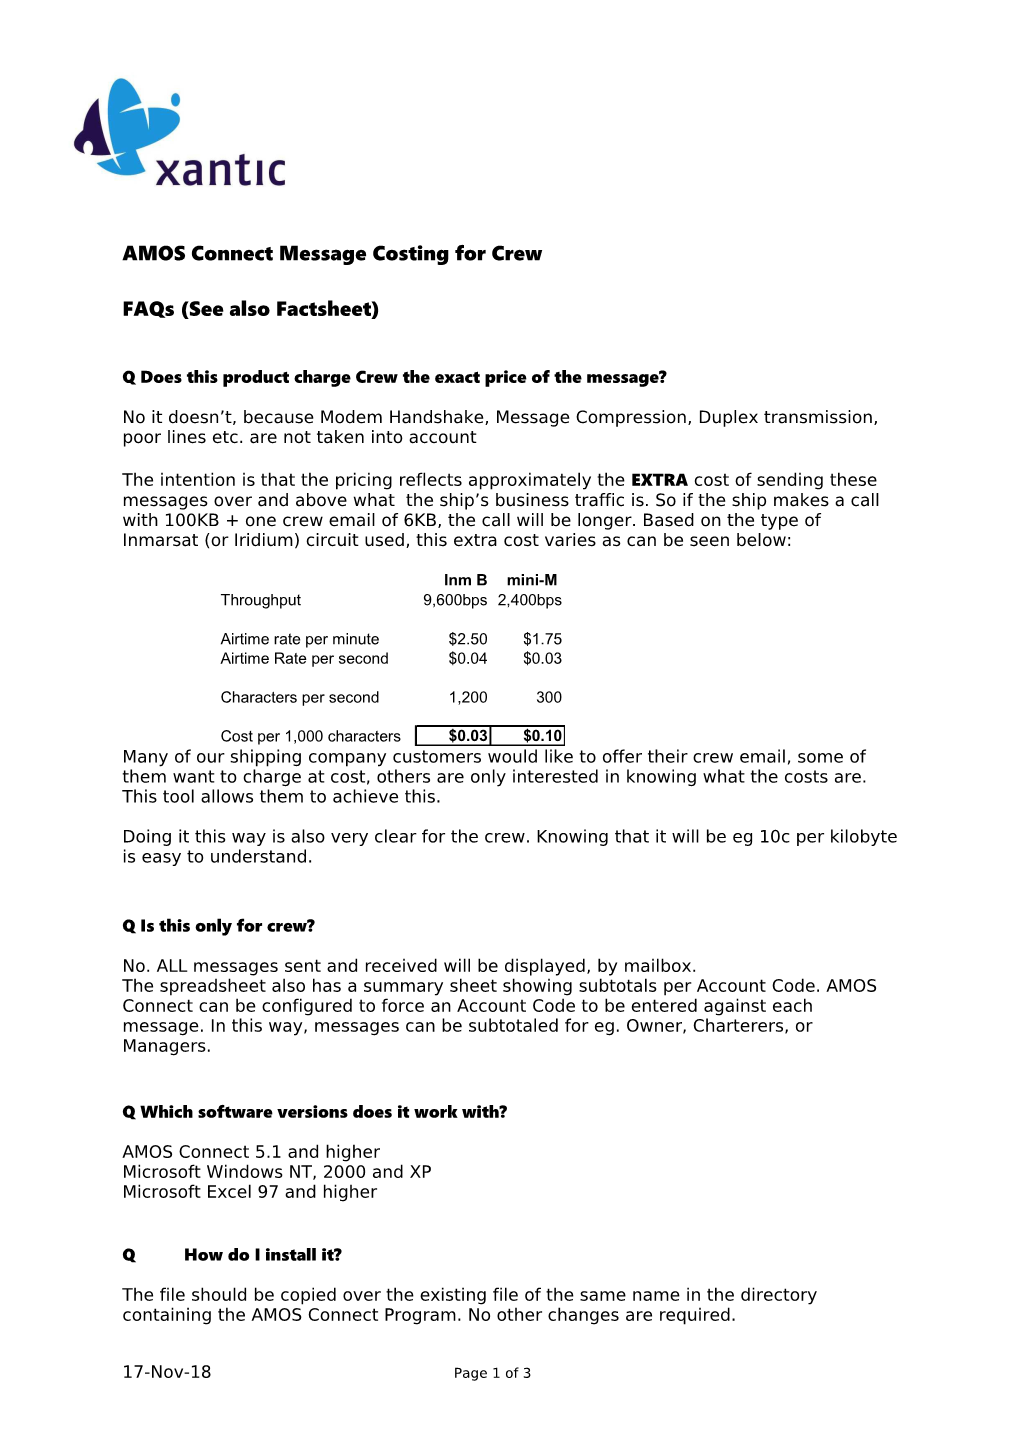 AMOS Connect Message Costing for Crew